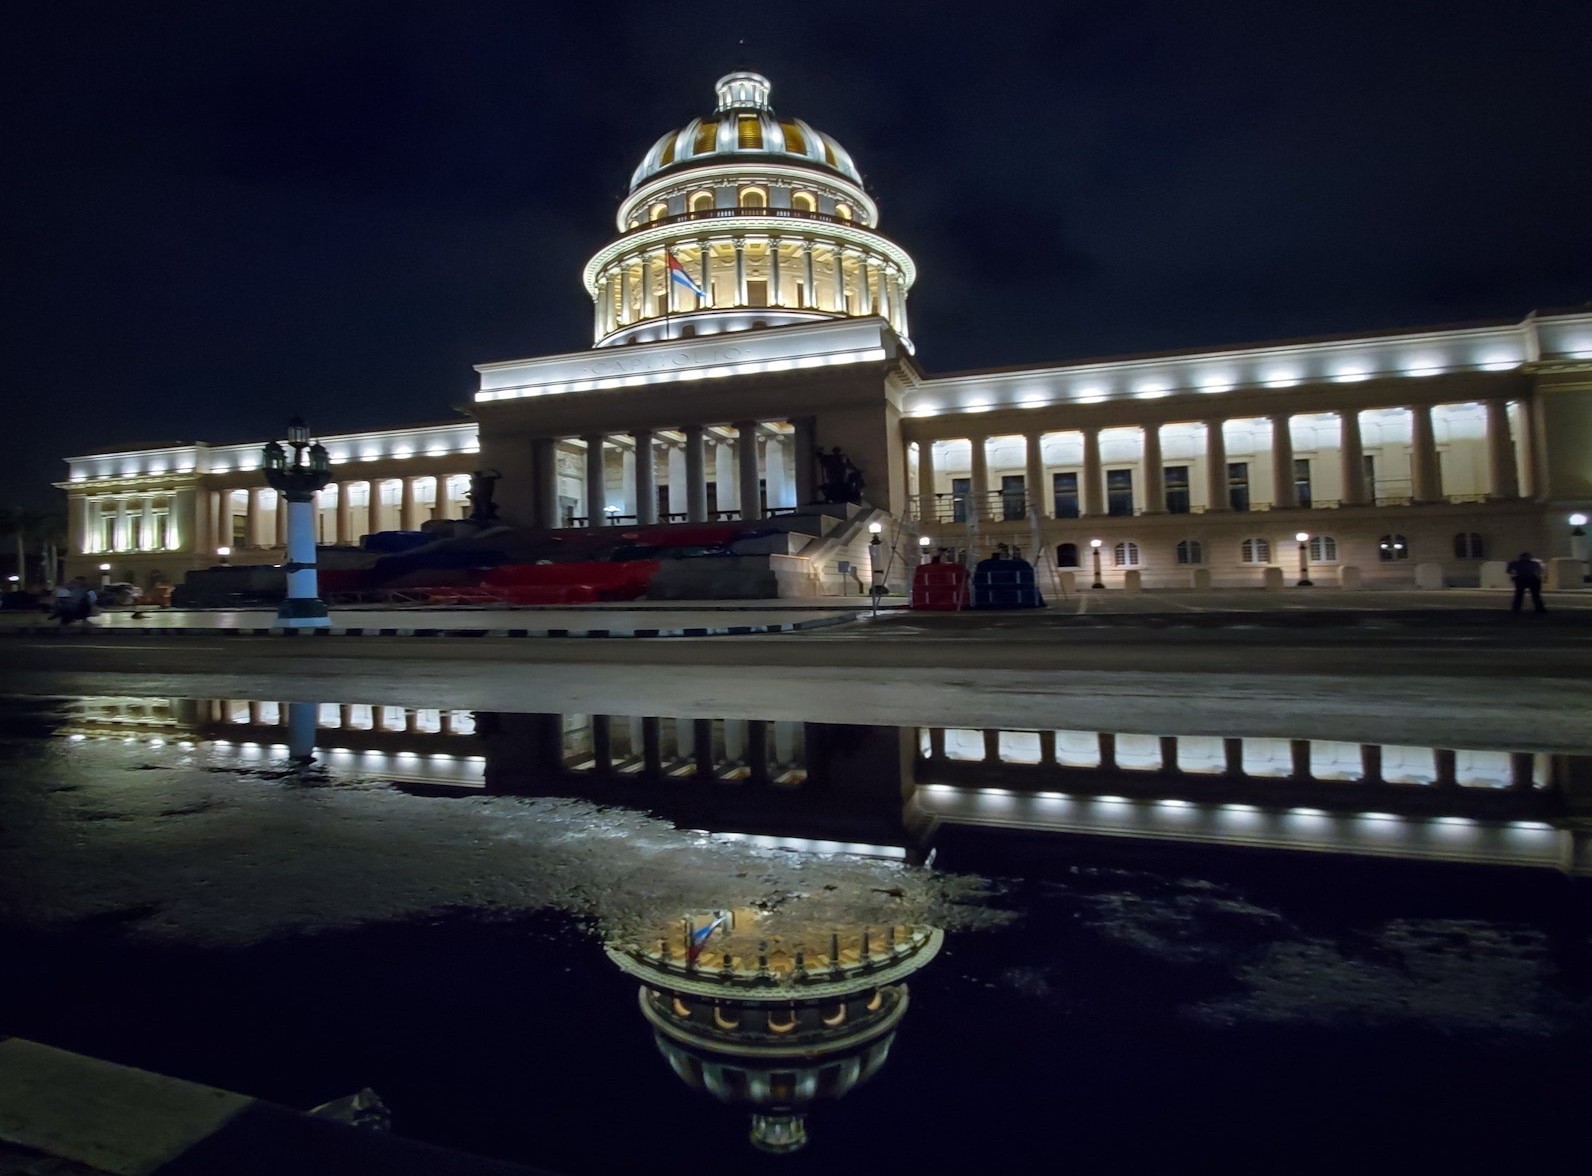 Cuban capital building lit up at night with the cupula reflected in water below